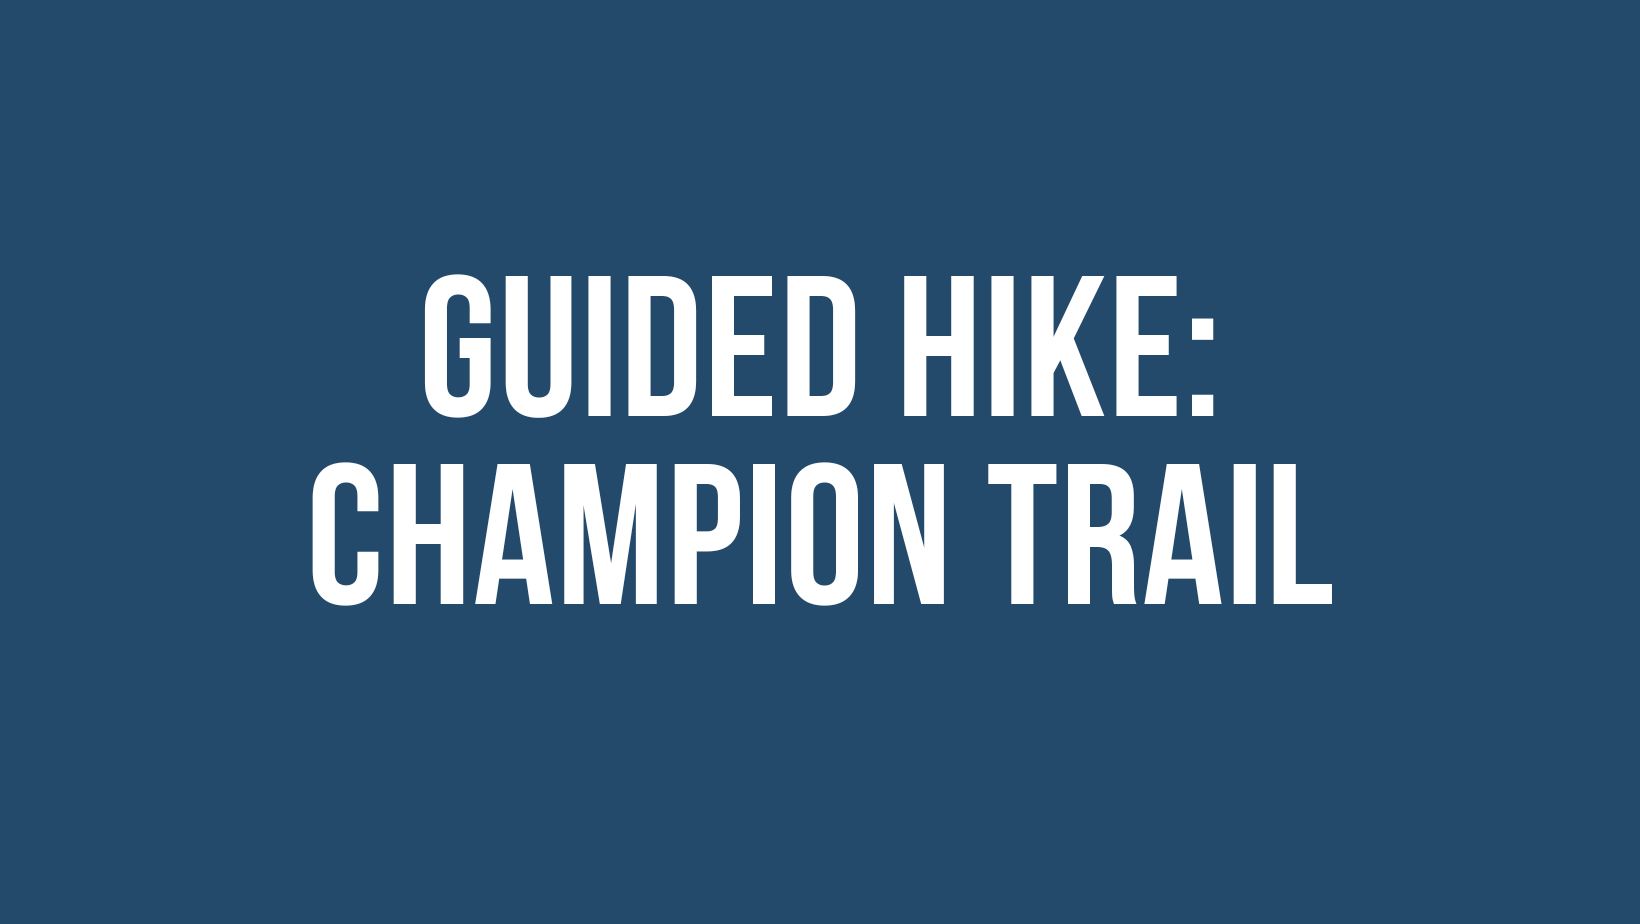 Guided Hike: Champion Trail